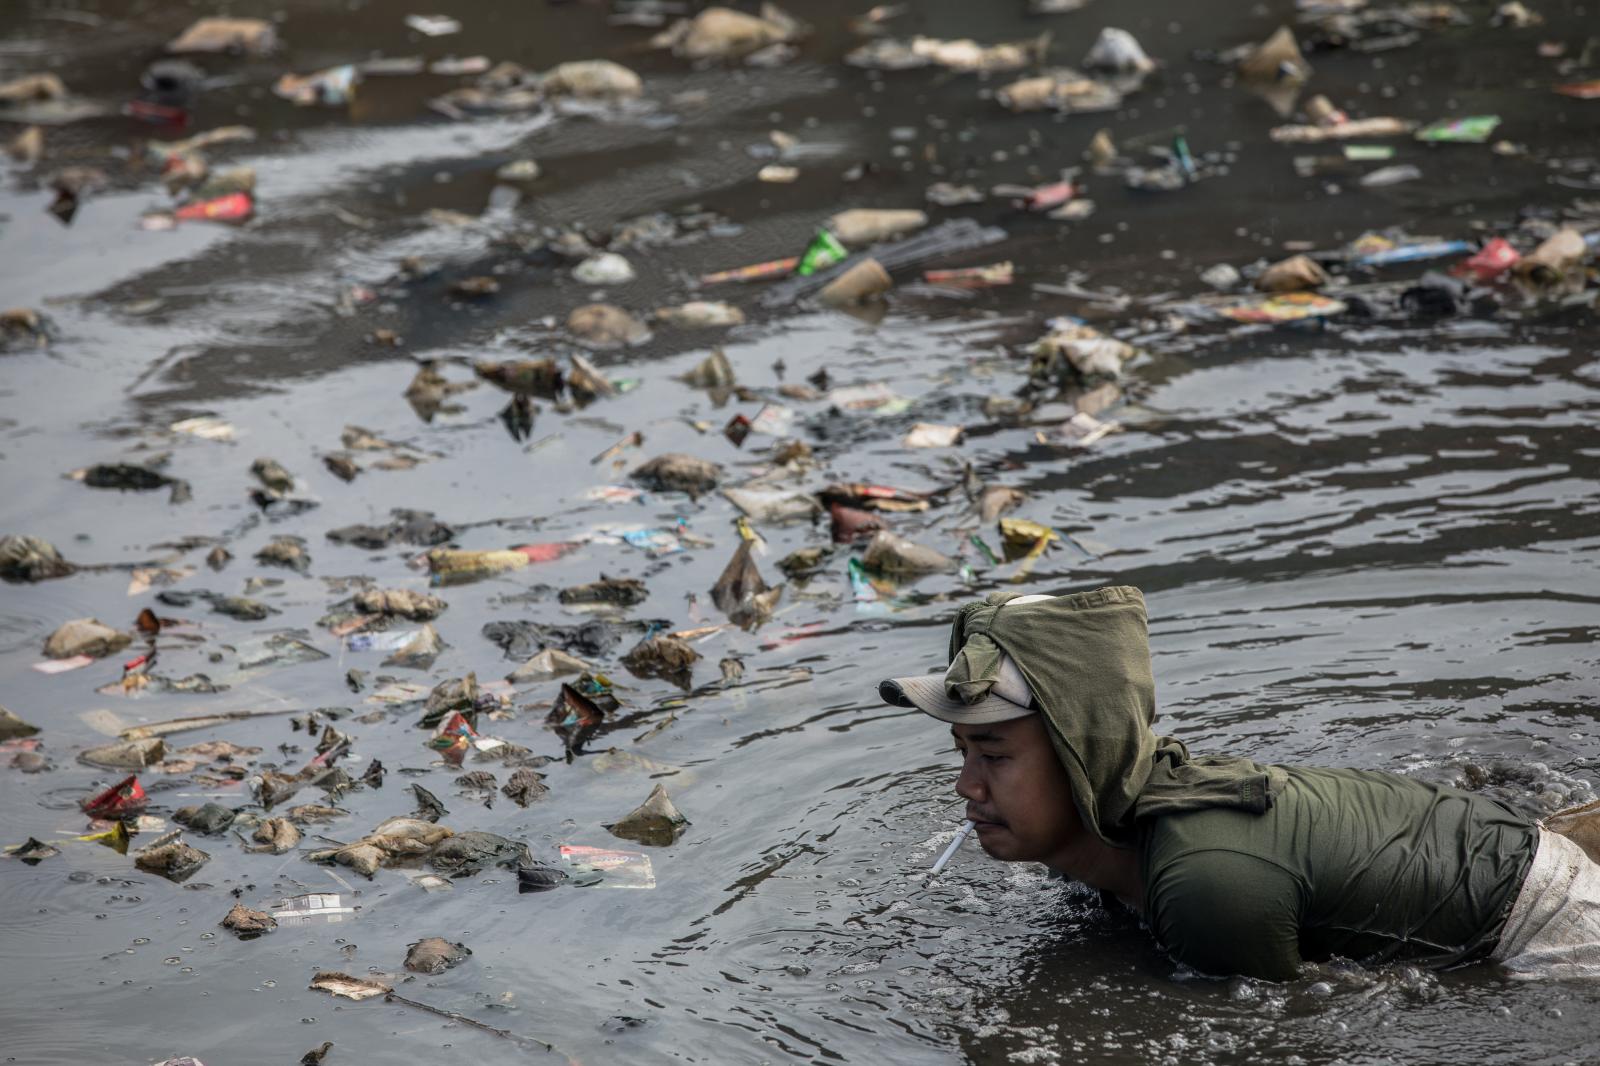 A man working at a polluted canal in Bogor, West Java, Indonesia.